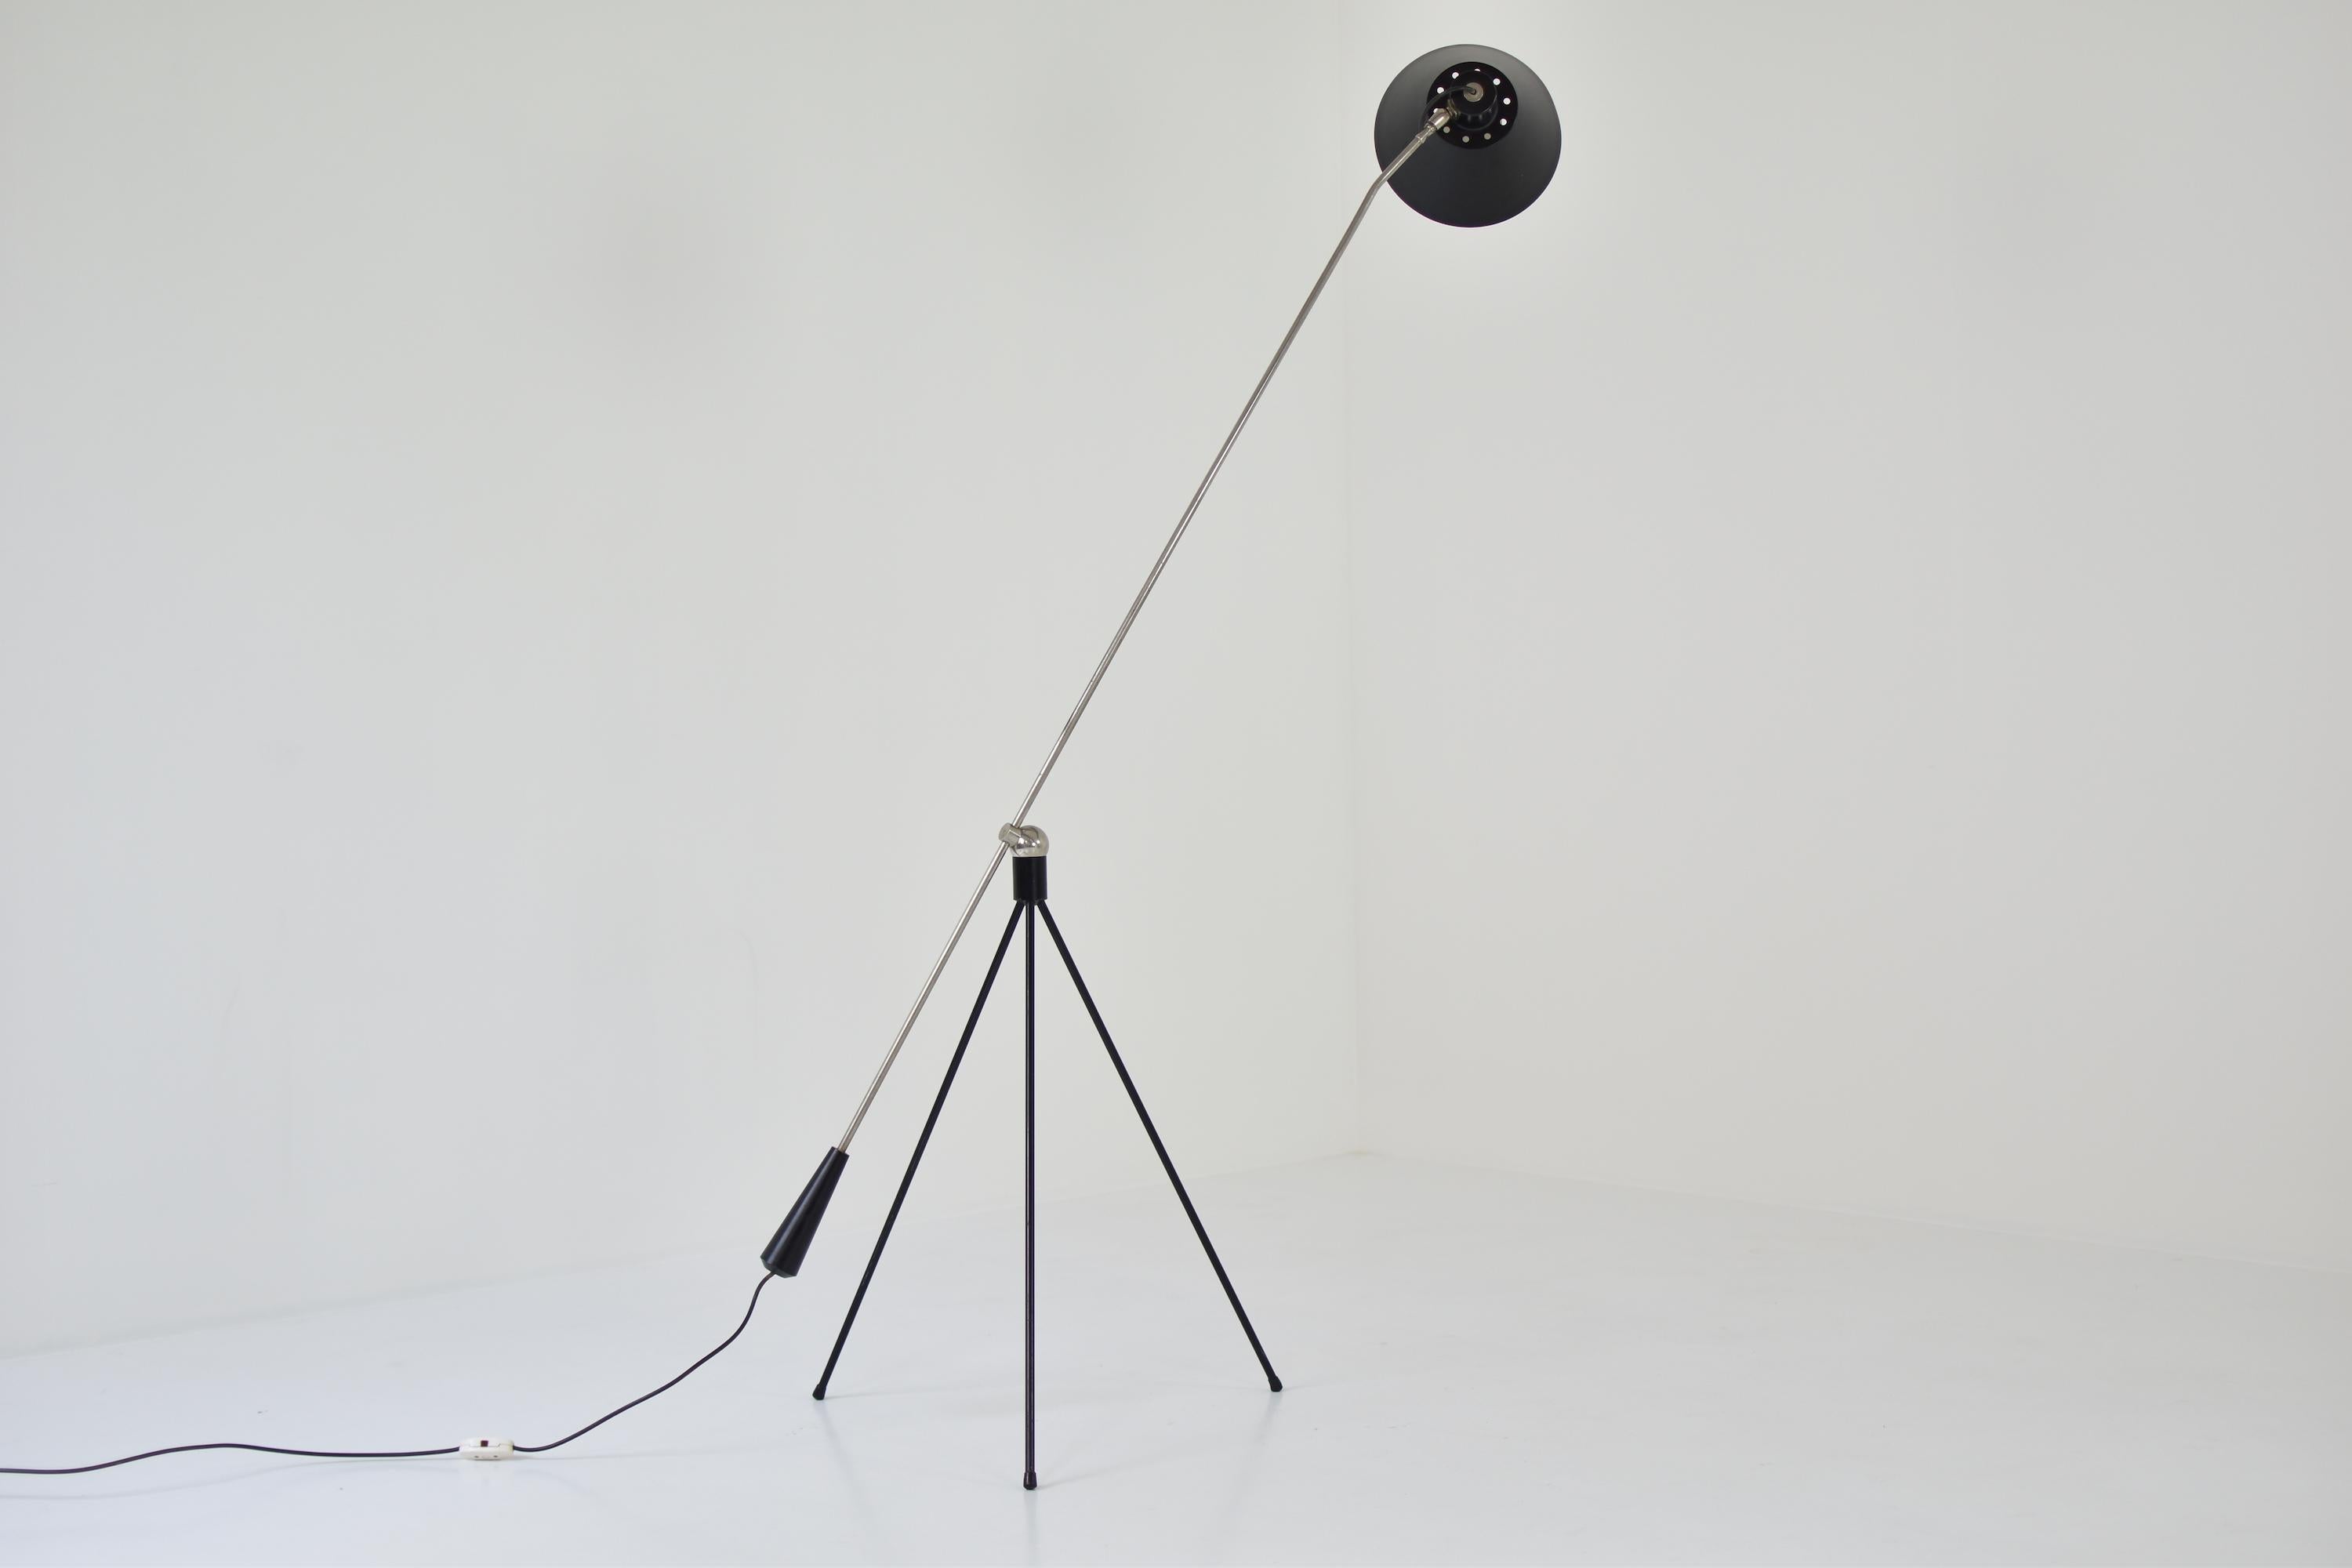 Admire this ‘Magneto’ floor lamp by H. Fillekes for Artiforte, the Netherlands, 1954. This minimalistic floor lamp features a lacquered metal tripod foot which is connected to a balance arm using a round shaped magnet and therefore allowing to place